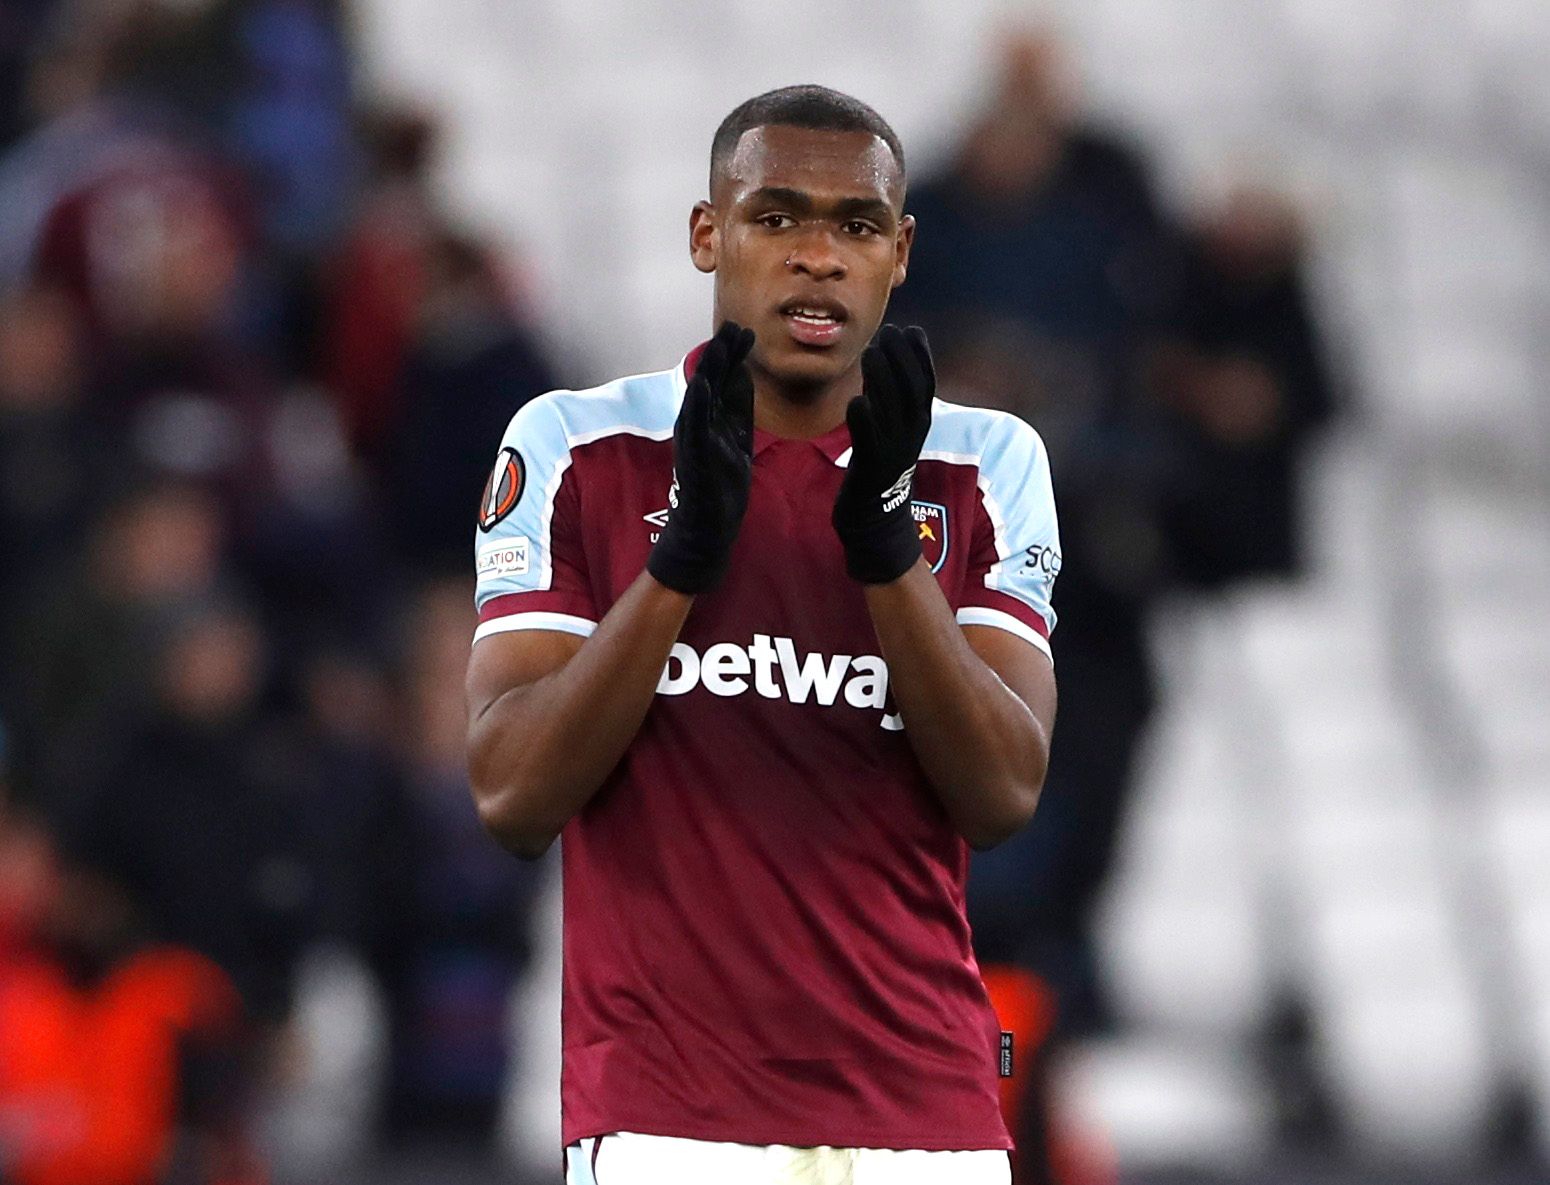 Soccer Football - Europa League - Group H - West Ham United v KRC Genk - London Stadium, London, Britain - October 21, 2021  West Ham United's Issa Diop applauds fans after the match Action Images via Reuters/Andrew Couldridge